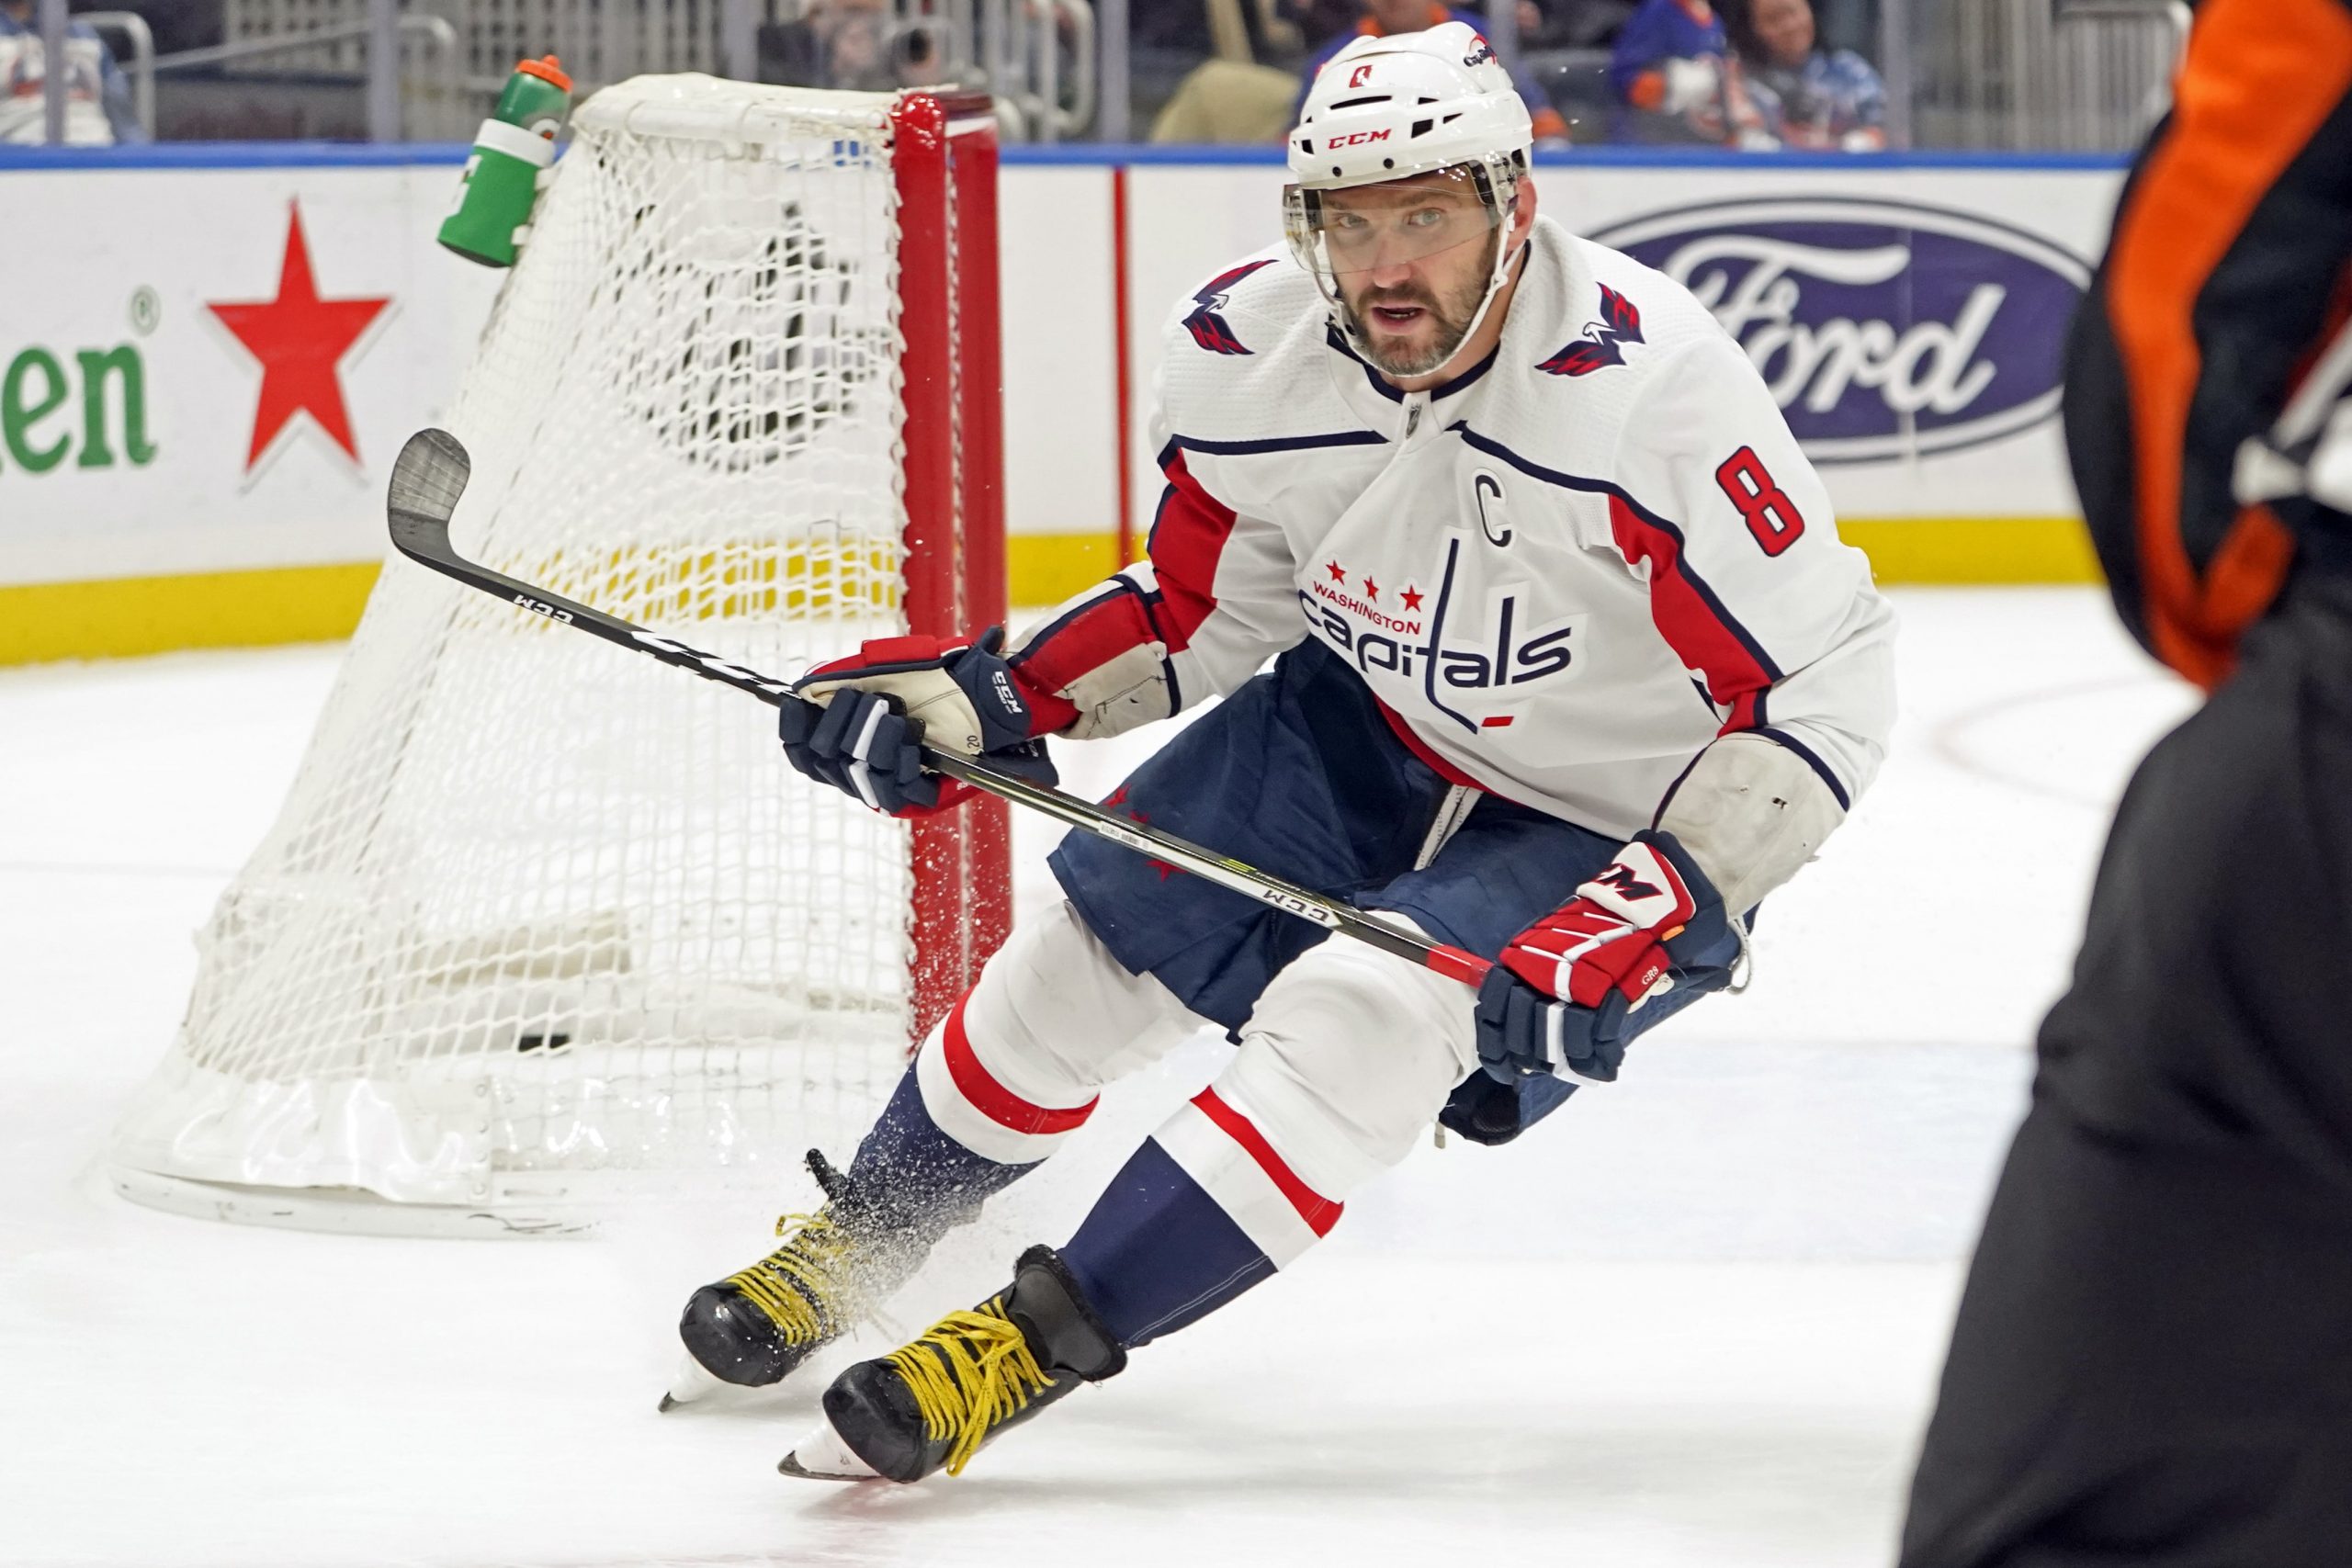 Washington Capitals left wing Alex Ovechkin scores on an empty net during the third period of an NHL hockey game against the New York Islanders, Saturday, Jan. 15, 2022, in Elmont, N.Y. The Capitals won 2-0